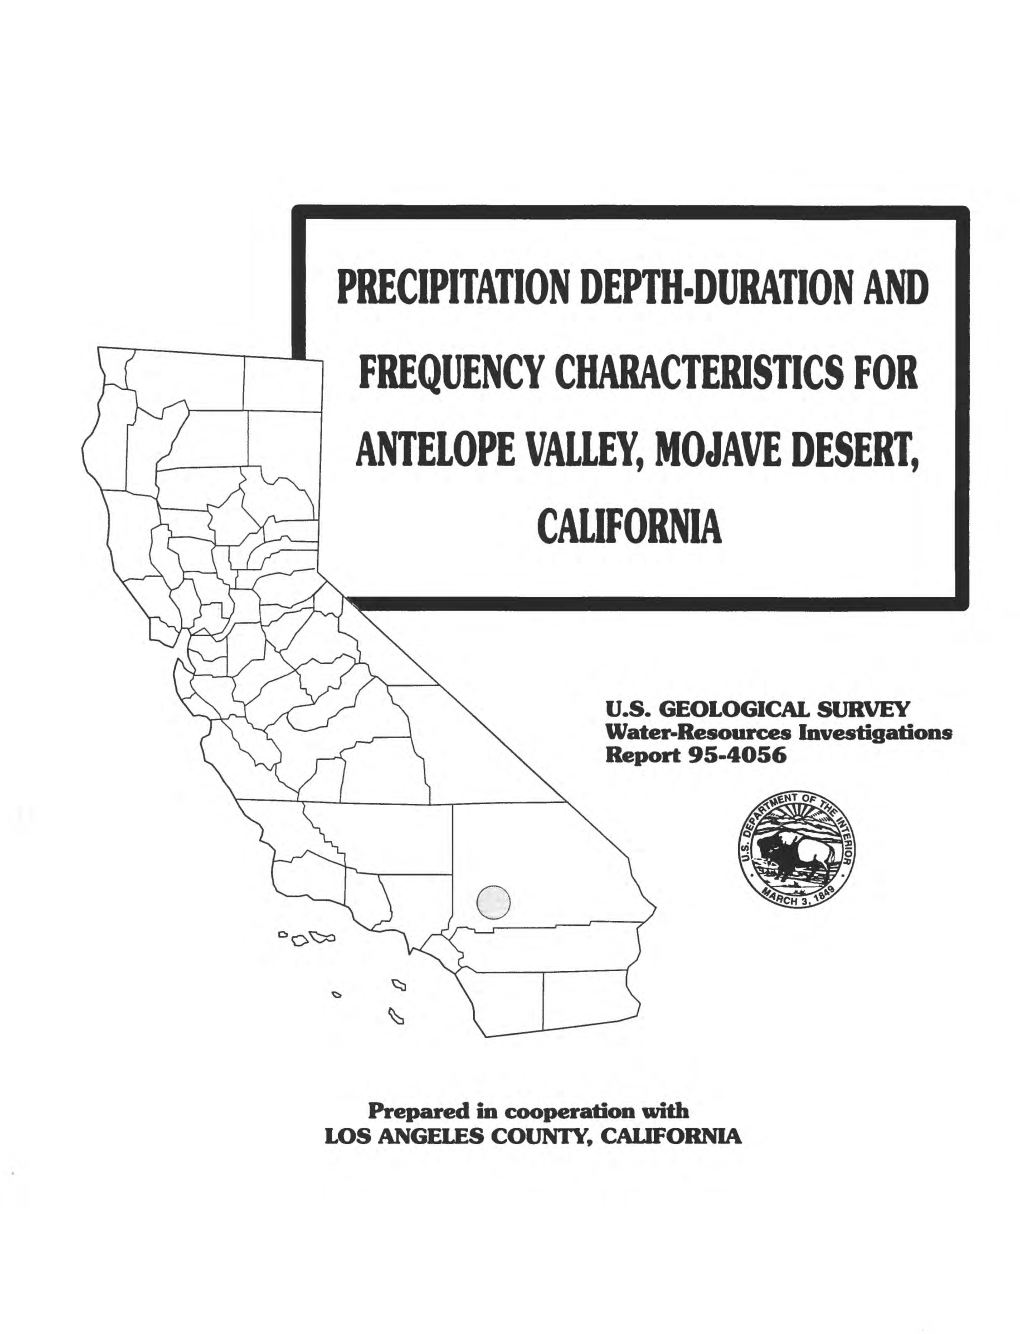 Precipitation Depth-Duration and Frequency Characteristics for Antelope Valley, Mojave Desert, California